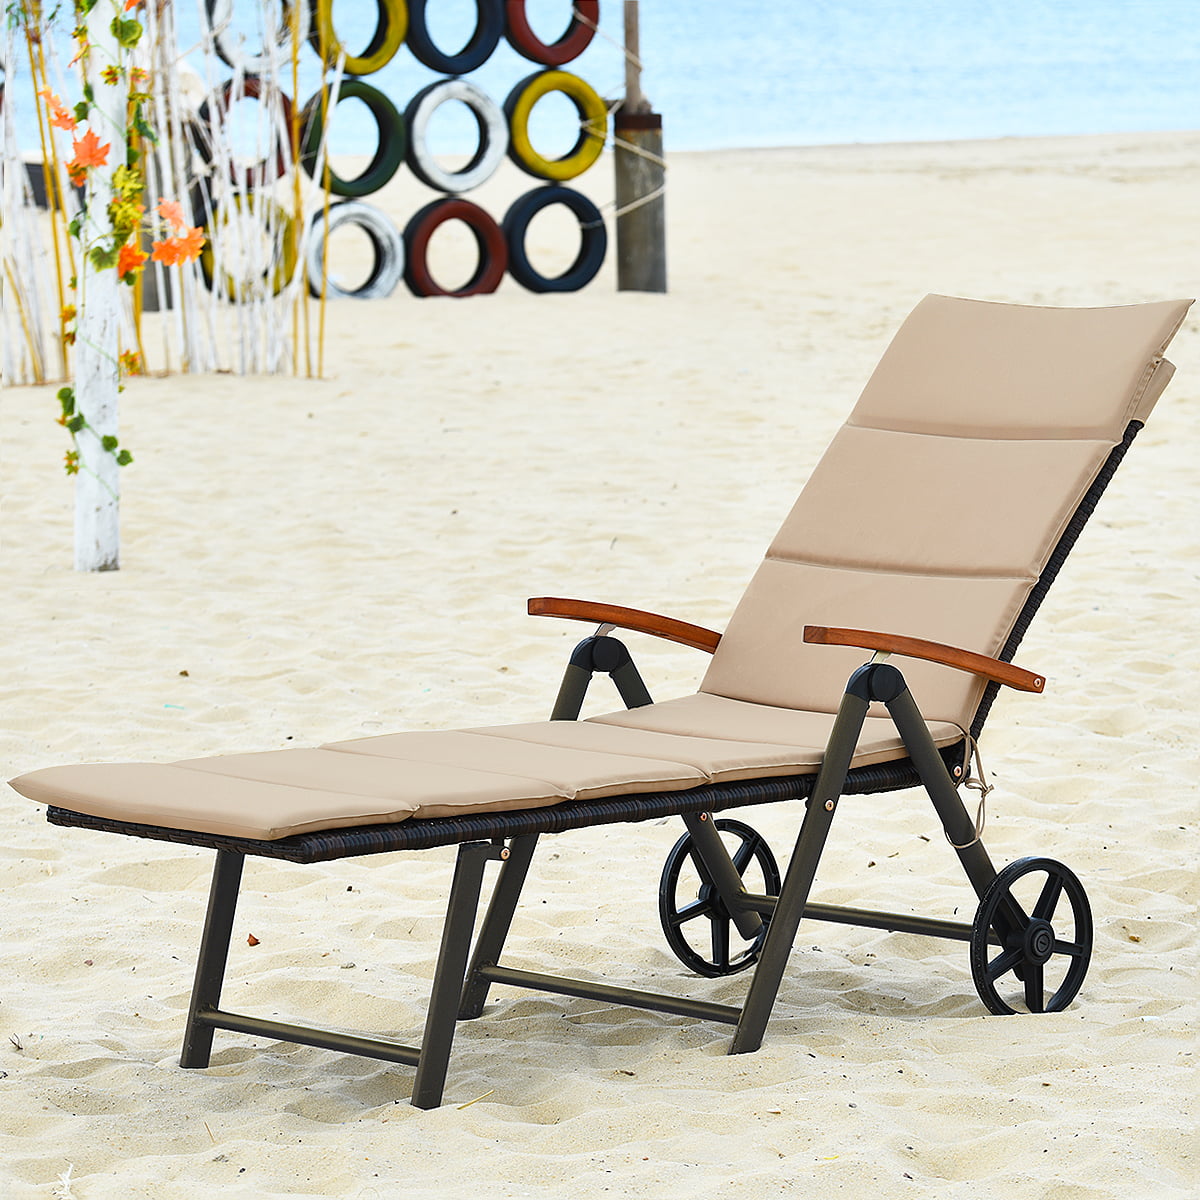 Costway Folding Outdoor Pool Chaise Lounge Chair Aluminum Rattan Lounger Recliner Chair Wwheels 